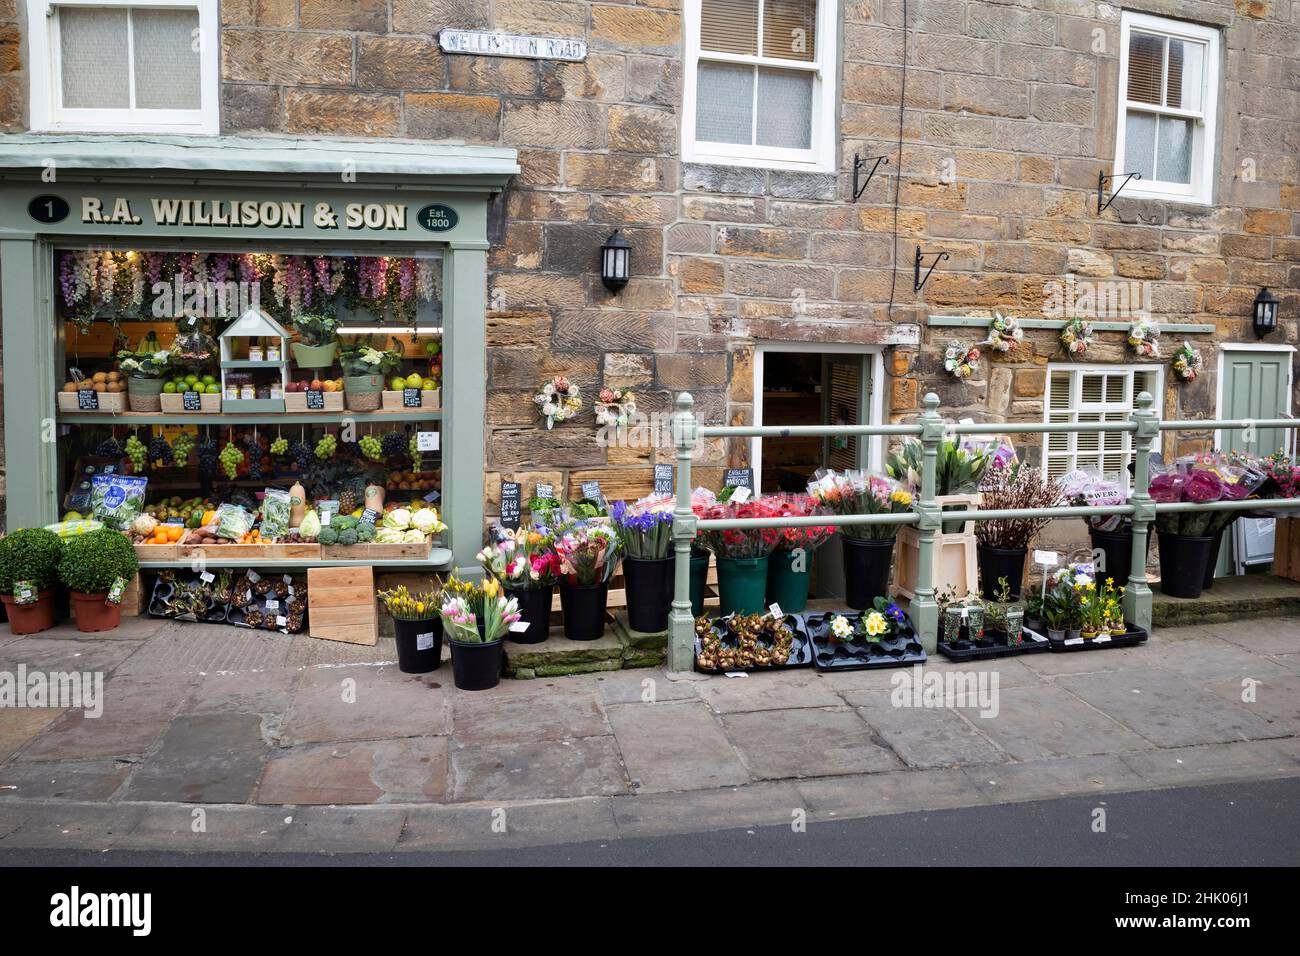 R A Willison A small fruit and flower shop, founded in 1800, in Whitby, North Yorkshire England UK Stock Photo